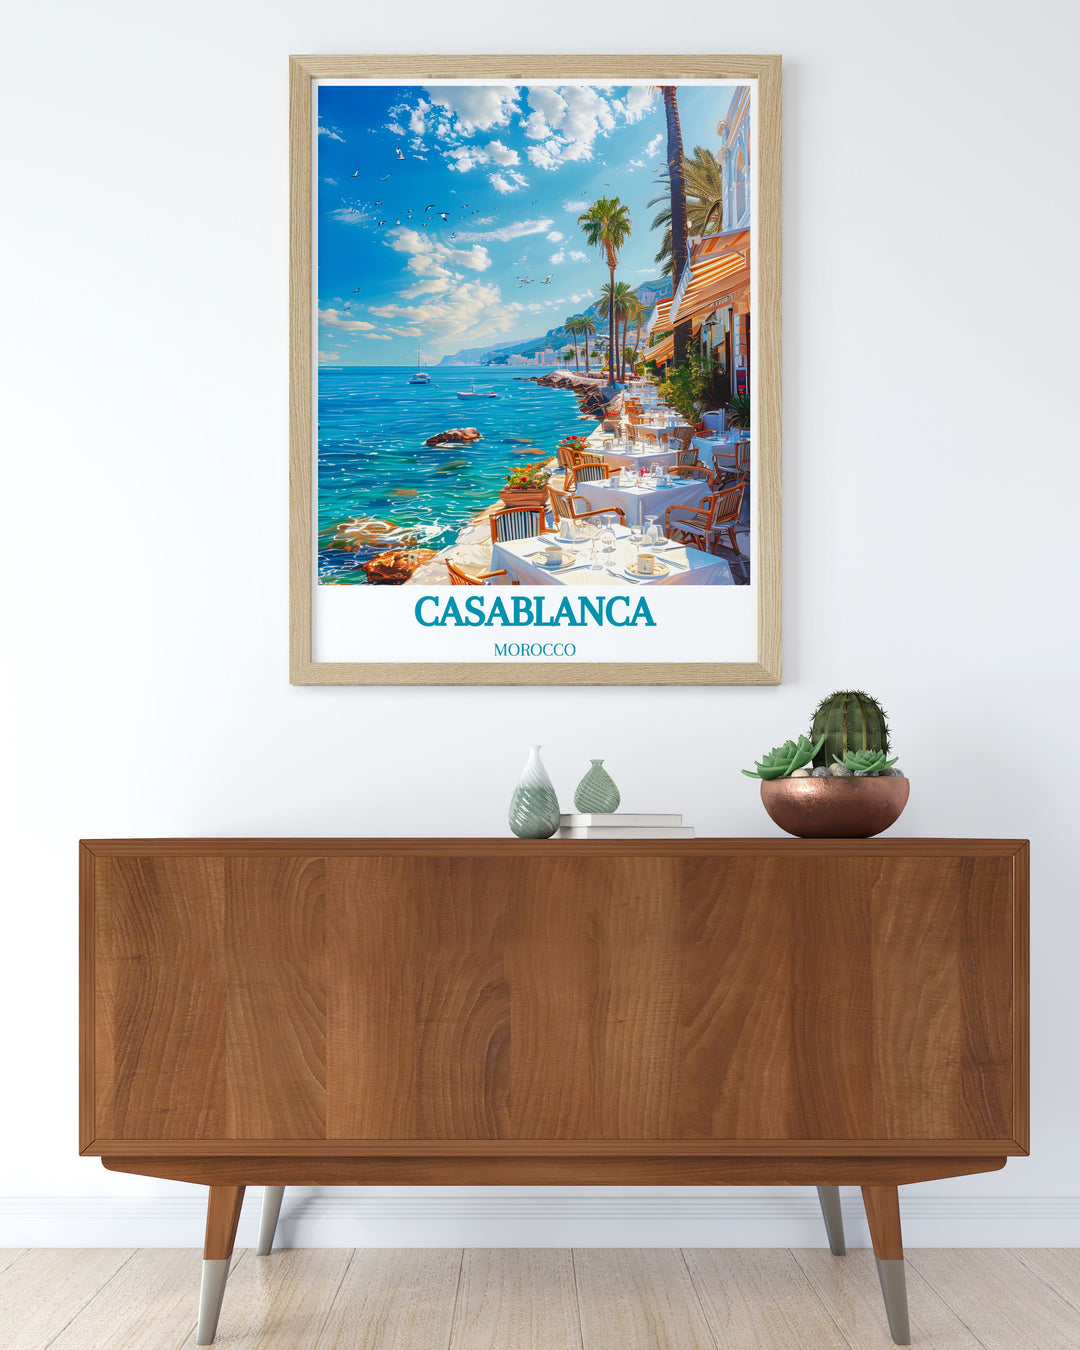 Casablanca poster depicting the charm of Moroccan markets and coastal views, a perfect gift for collectors and travel enthusiasts.